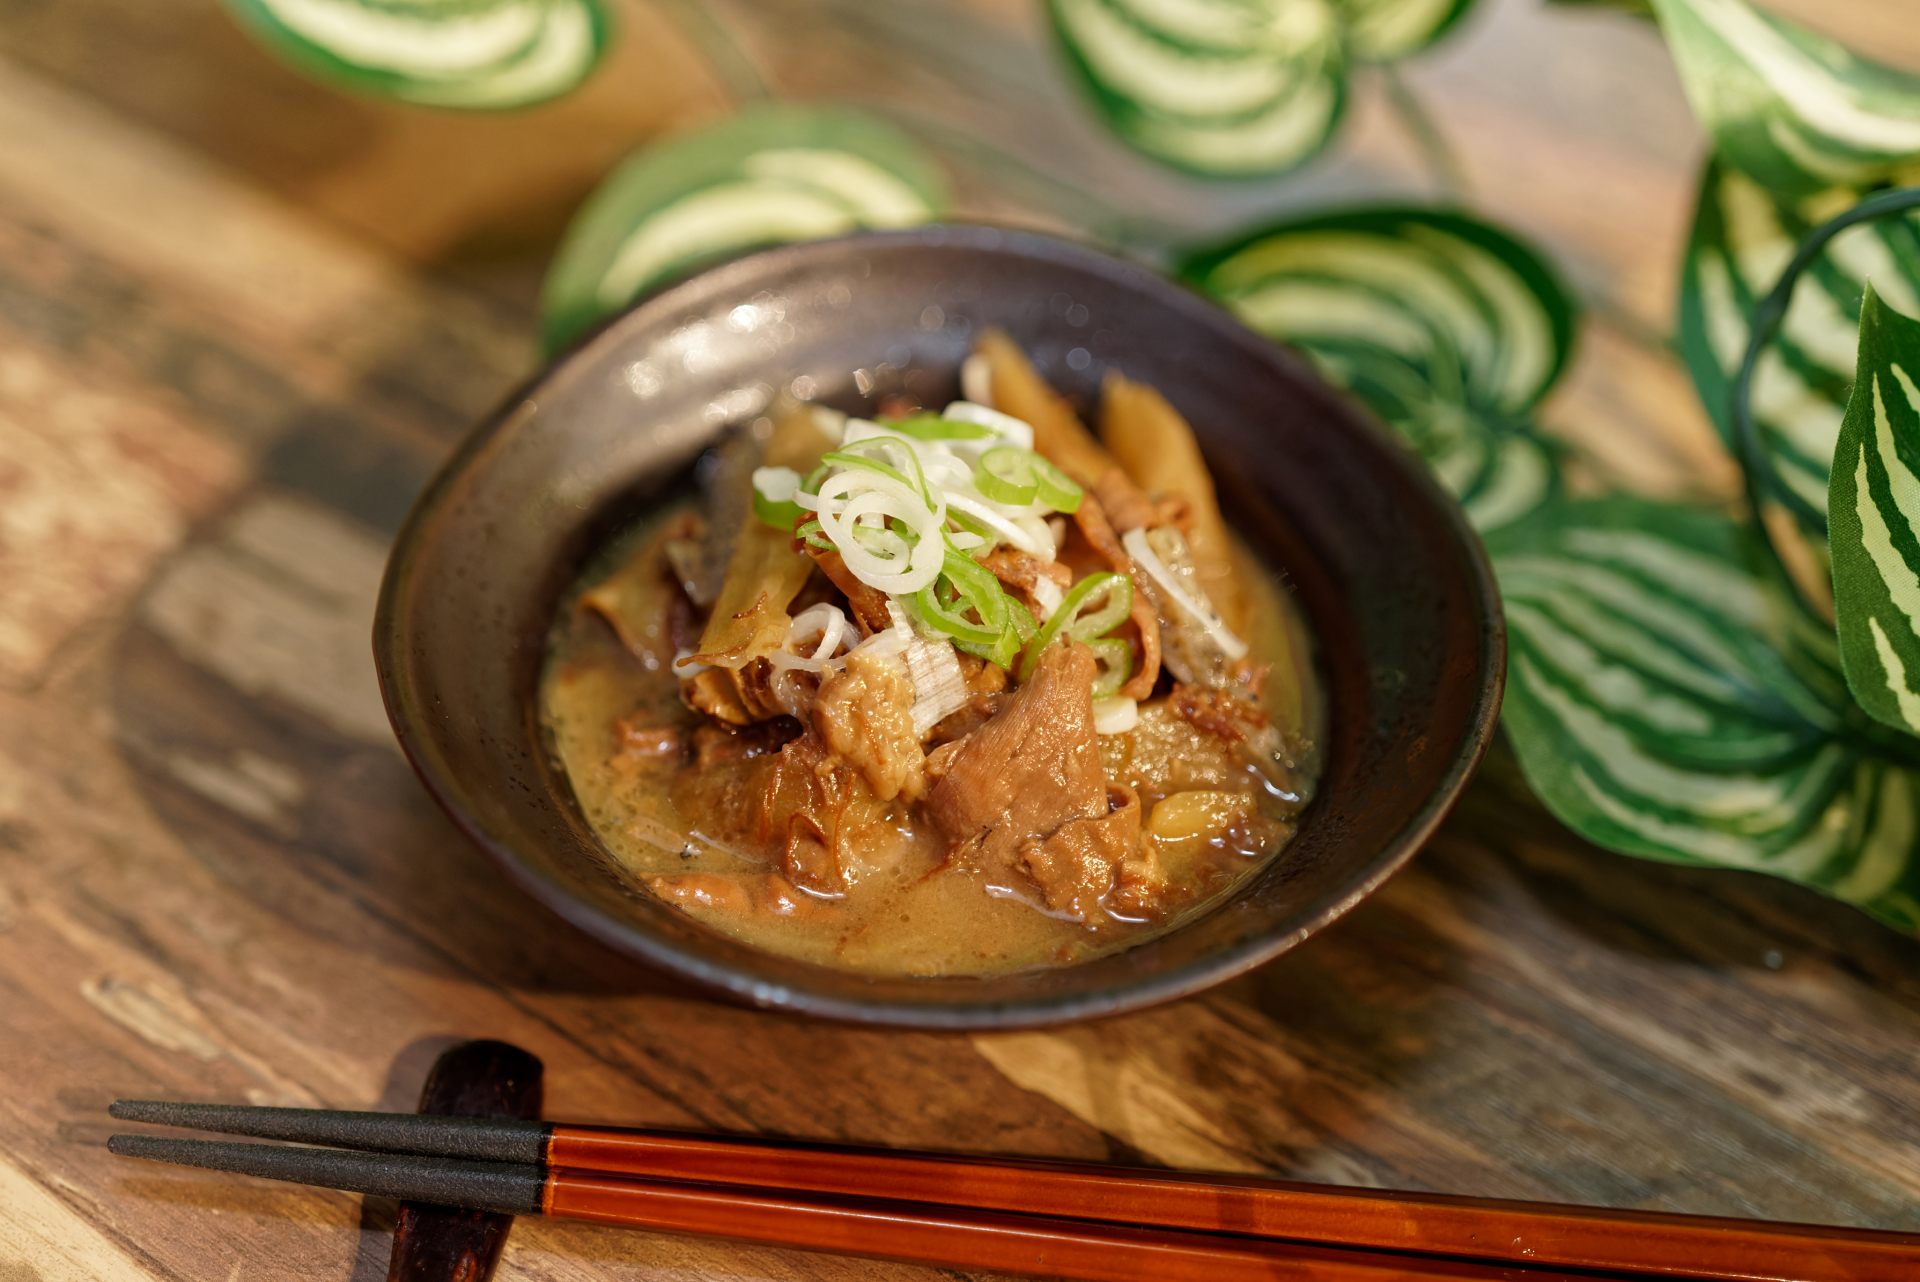 A classic dish from the Oi Racecourse, the famous simmered “Motsu Nikomi” bowl.